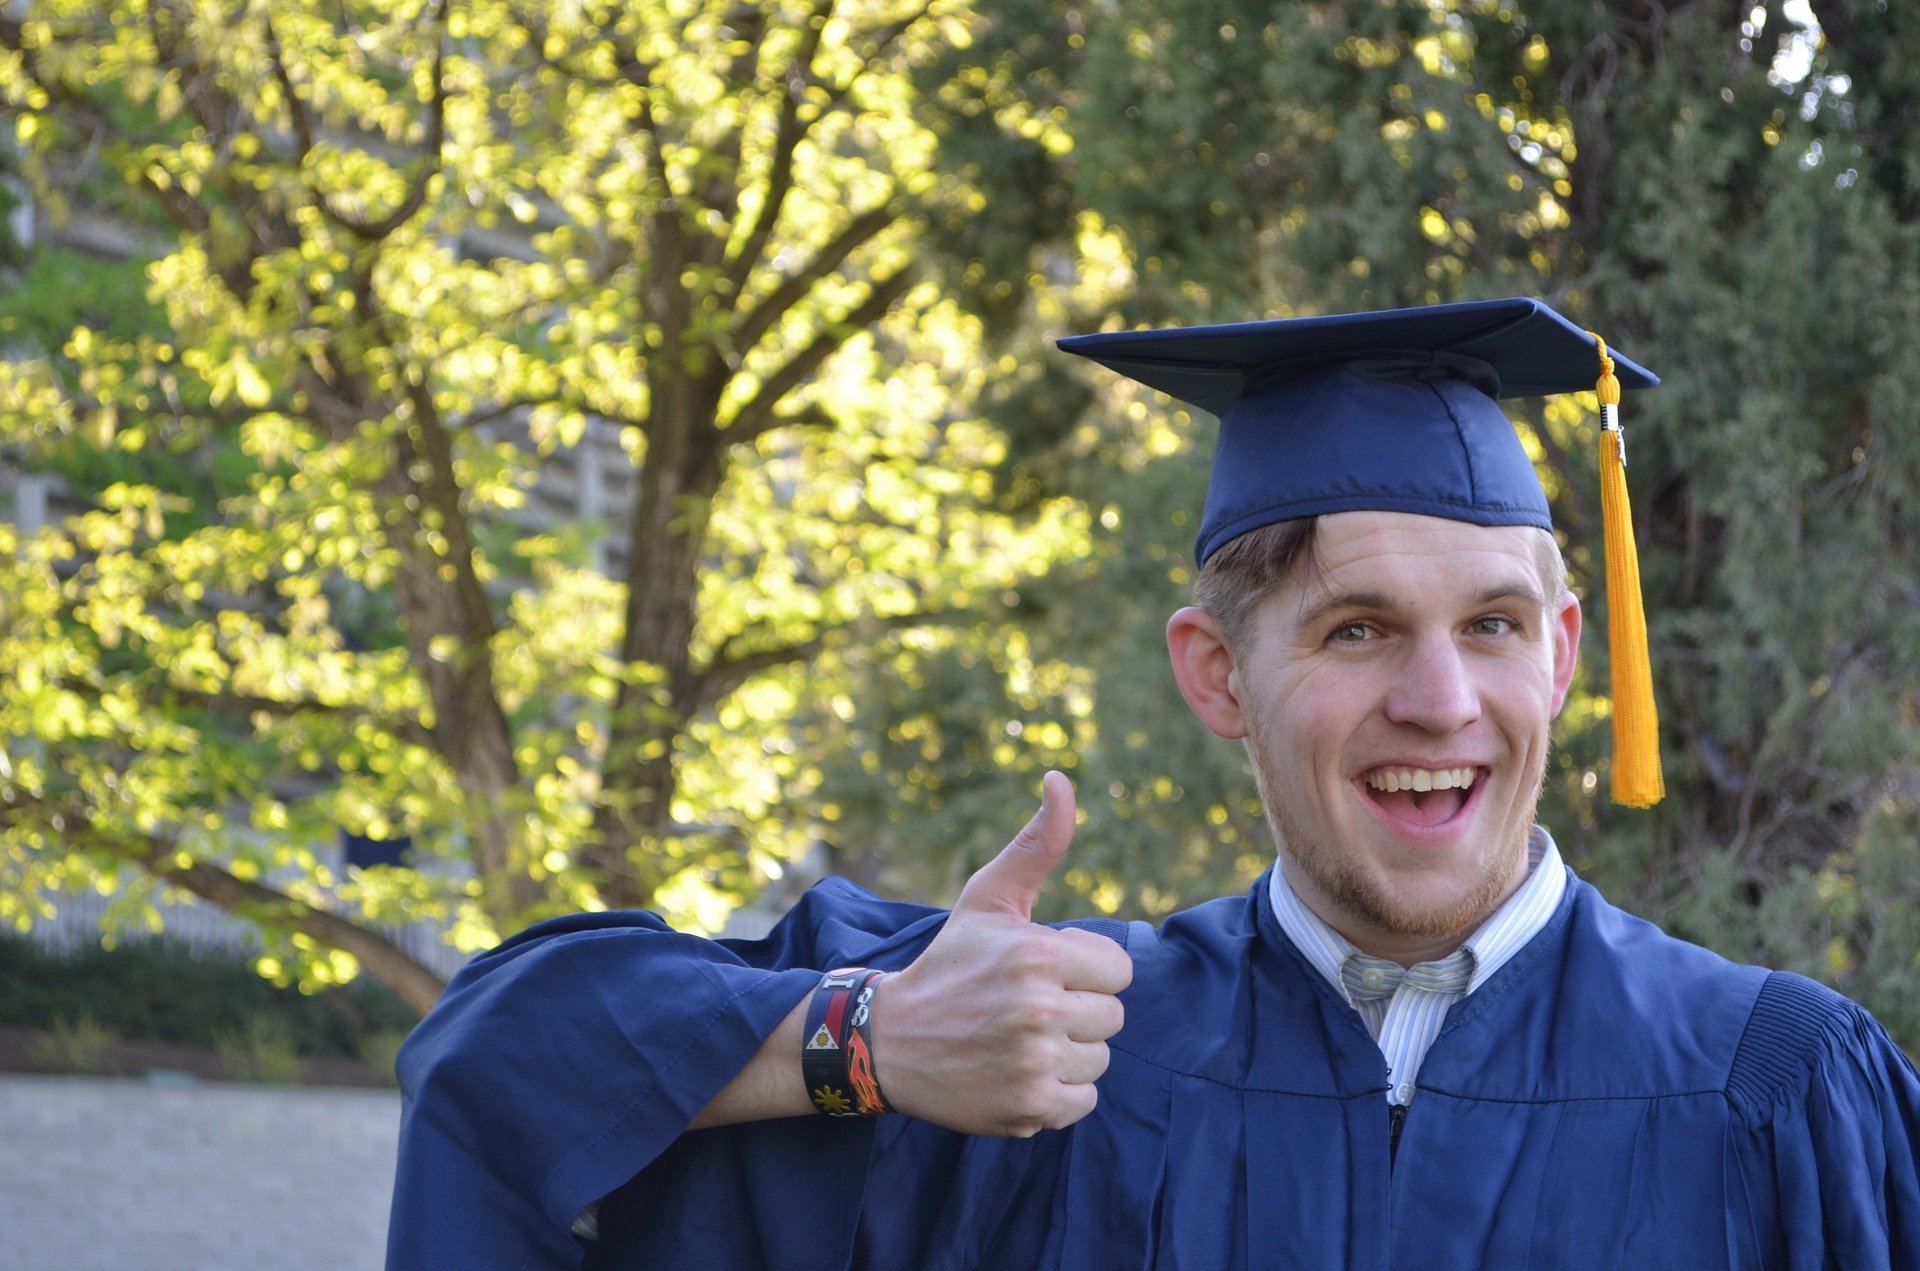 A man shows a thumbs up wearing his graduation attire and beaming with pride | Source: Pixabay